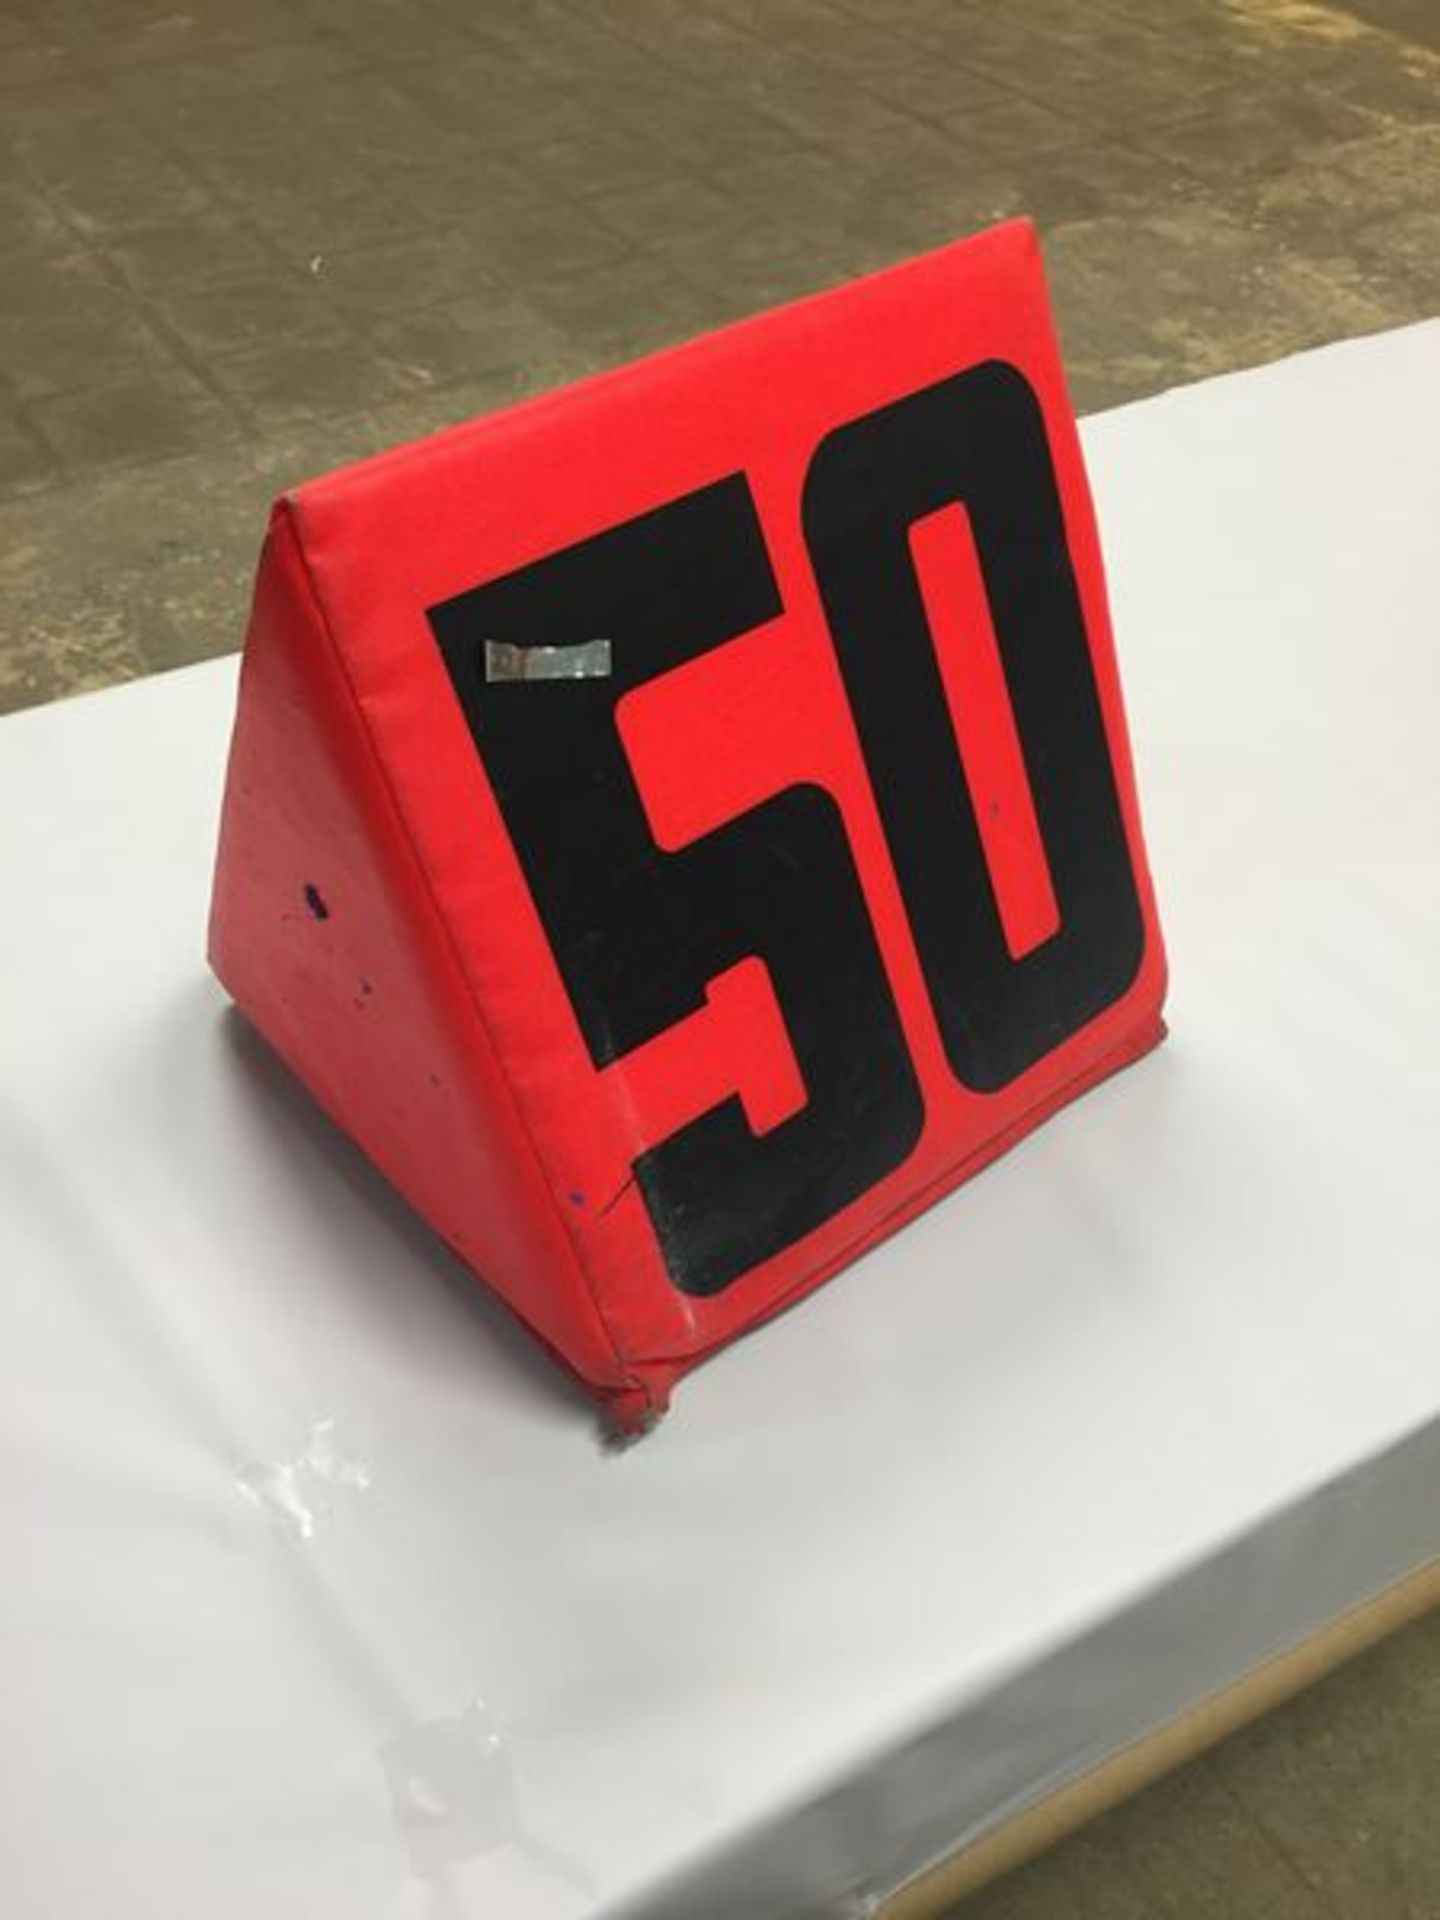 50 yard"" Sideline Marker / Game-Used / This item includes Georgia Dome Authentication Tag